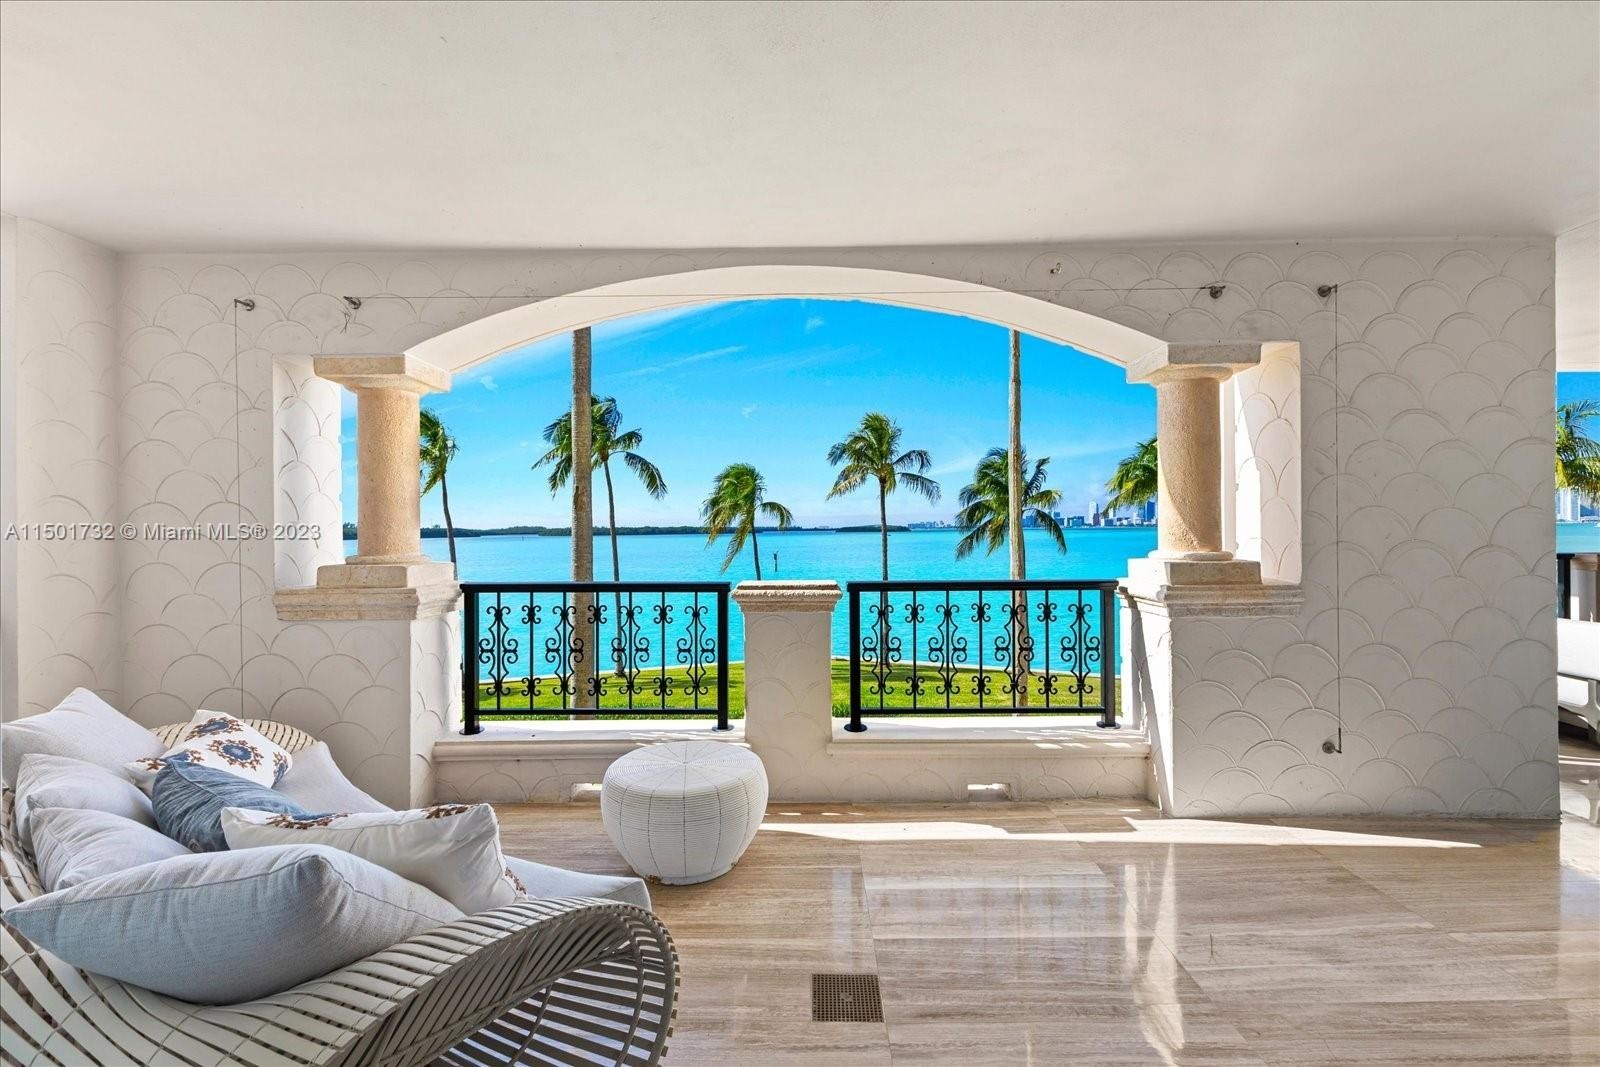 31. 5223 Fisher Island Dr